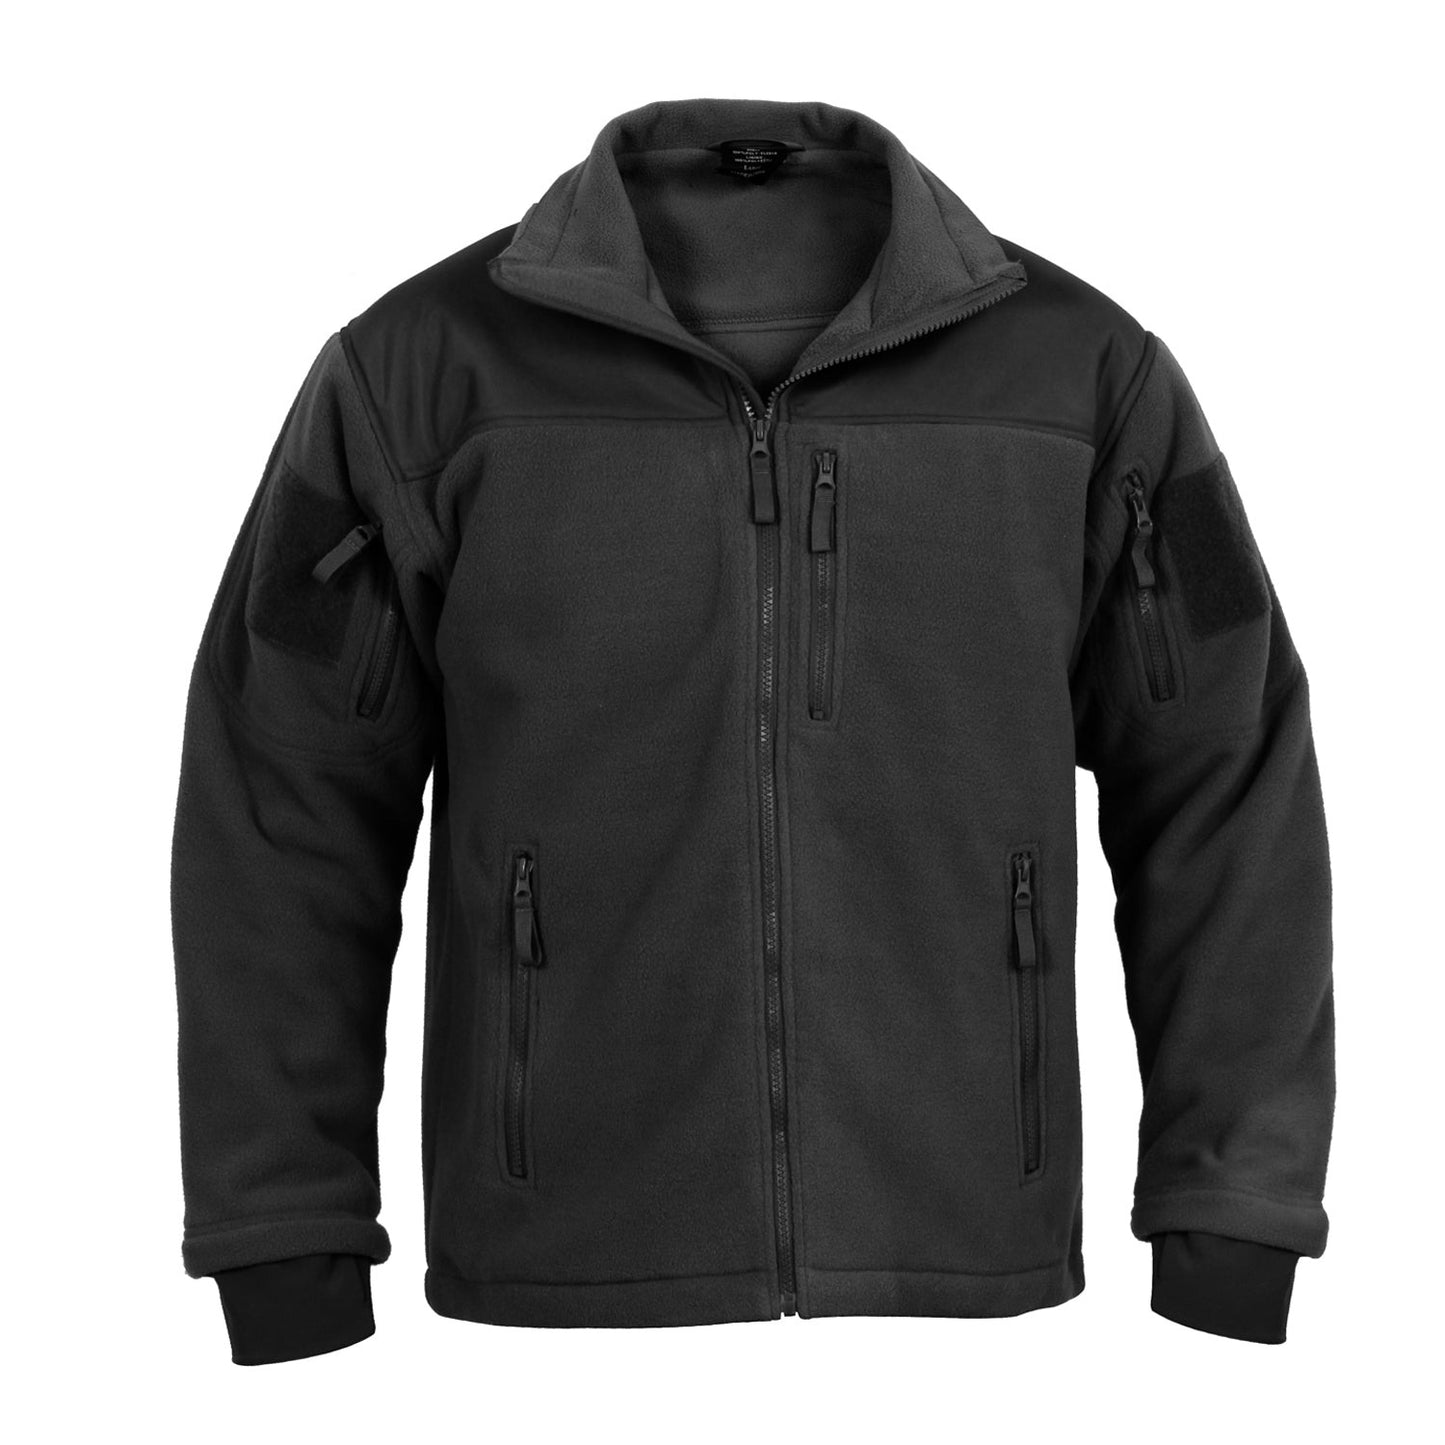 Rothco Spec Ops Tactical Fleece Jacket Black – Defence Q Store